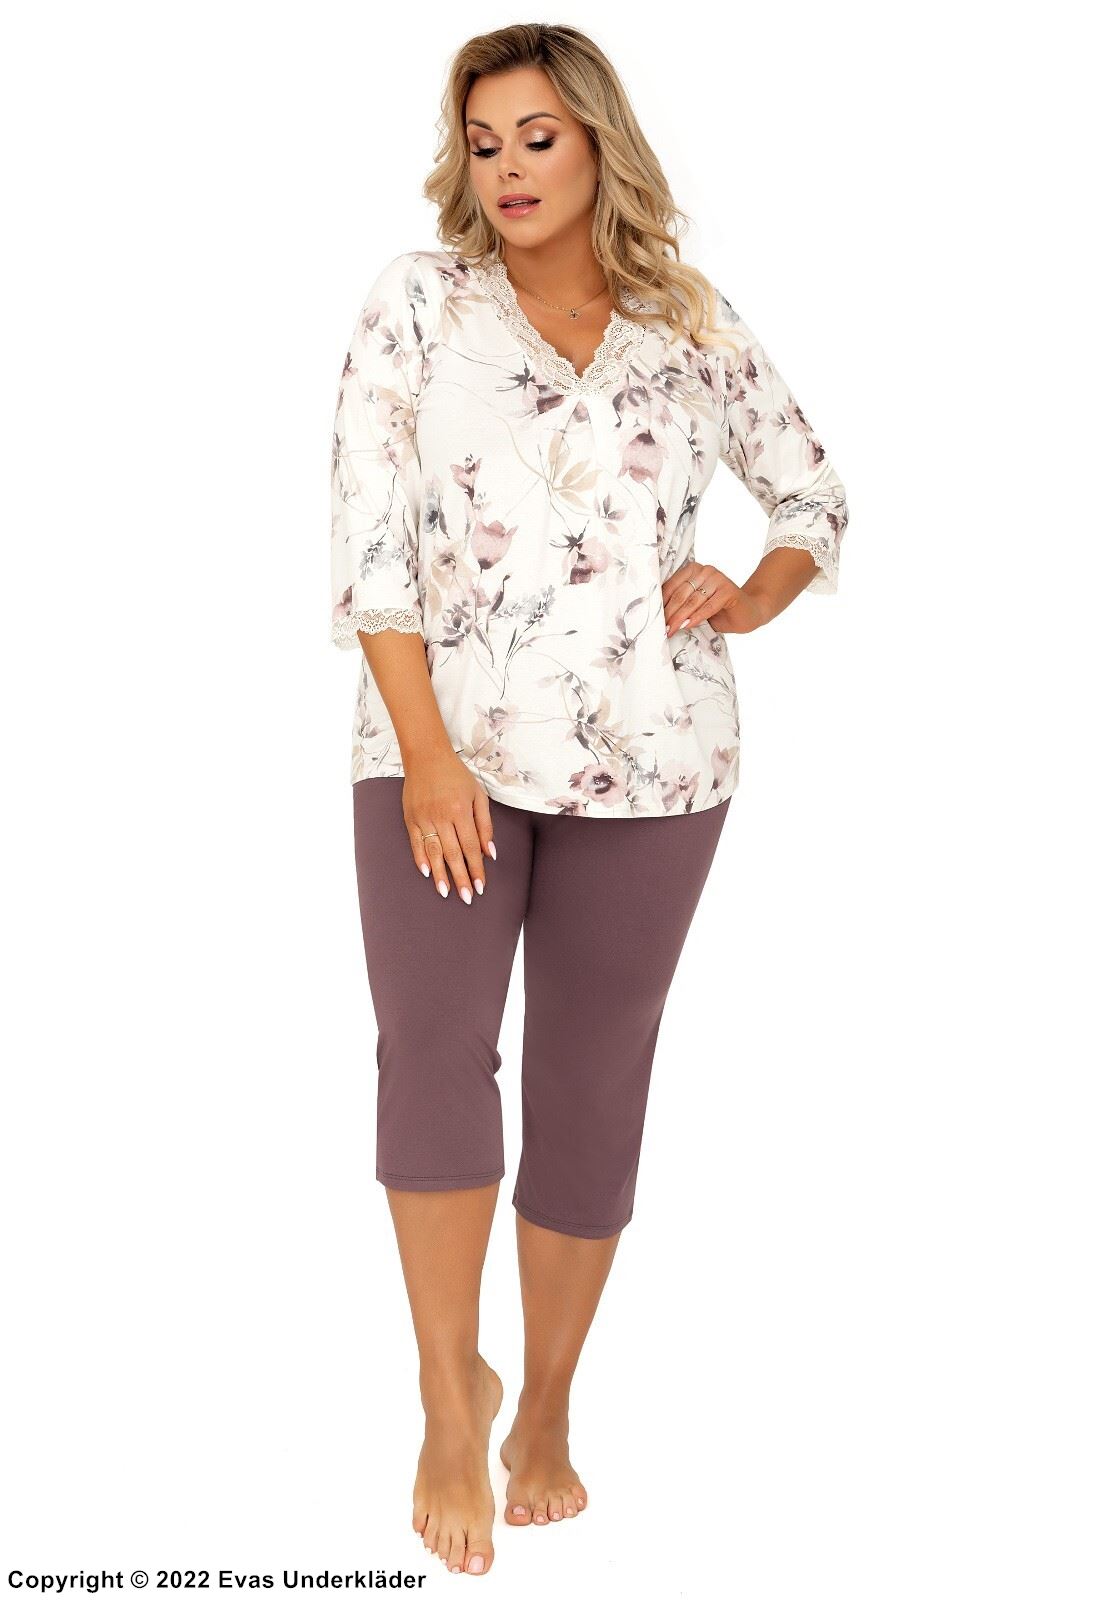 Top and pants pajamas, lace trim, 3/4 length sleeves, flowers, plus size